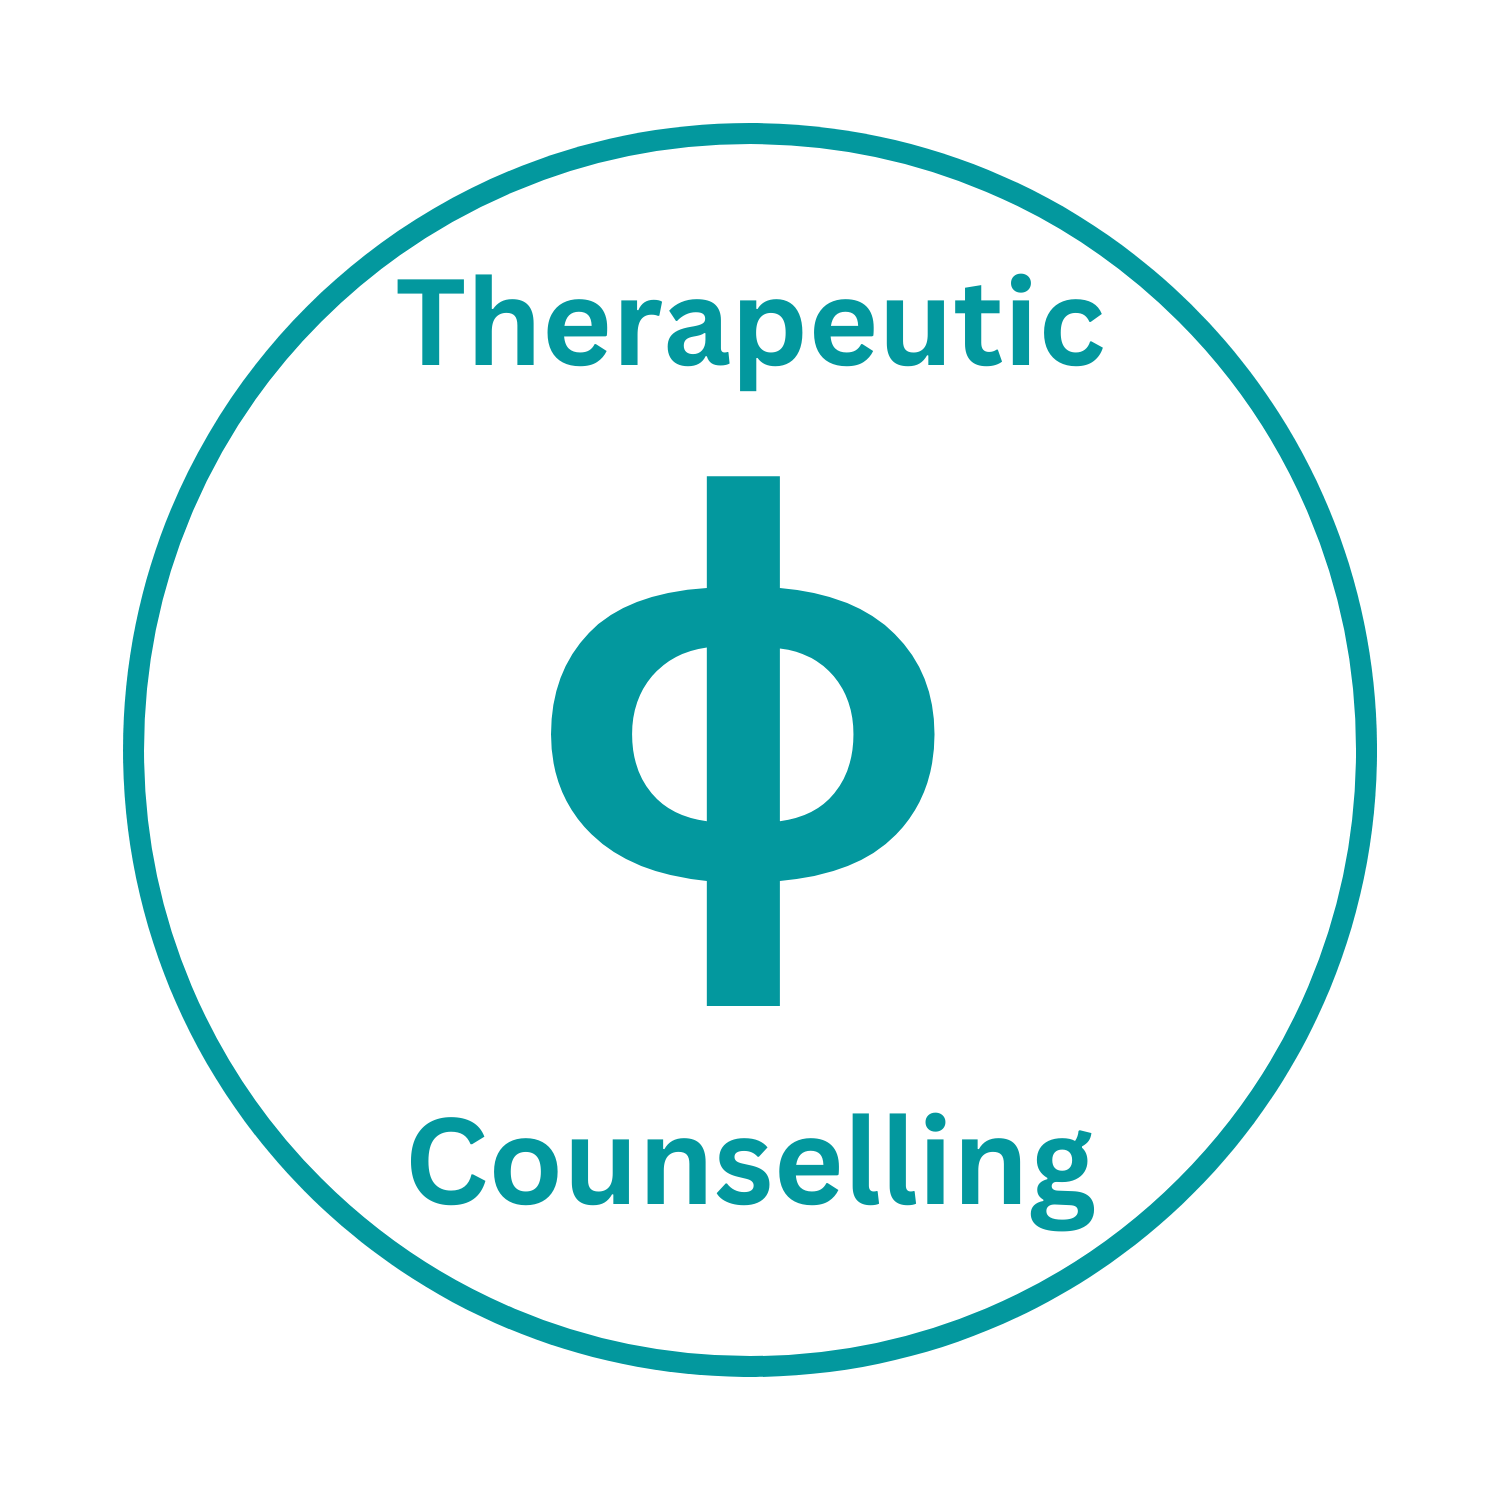 Therapeutic Counselling